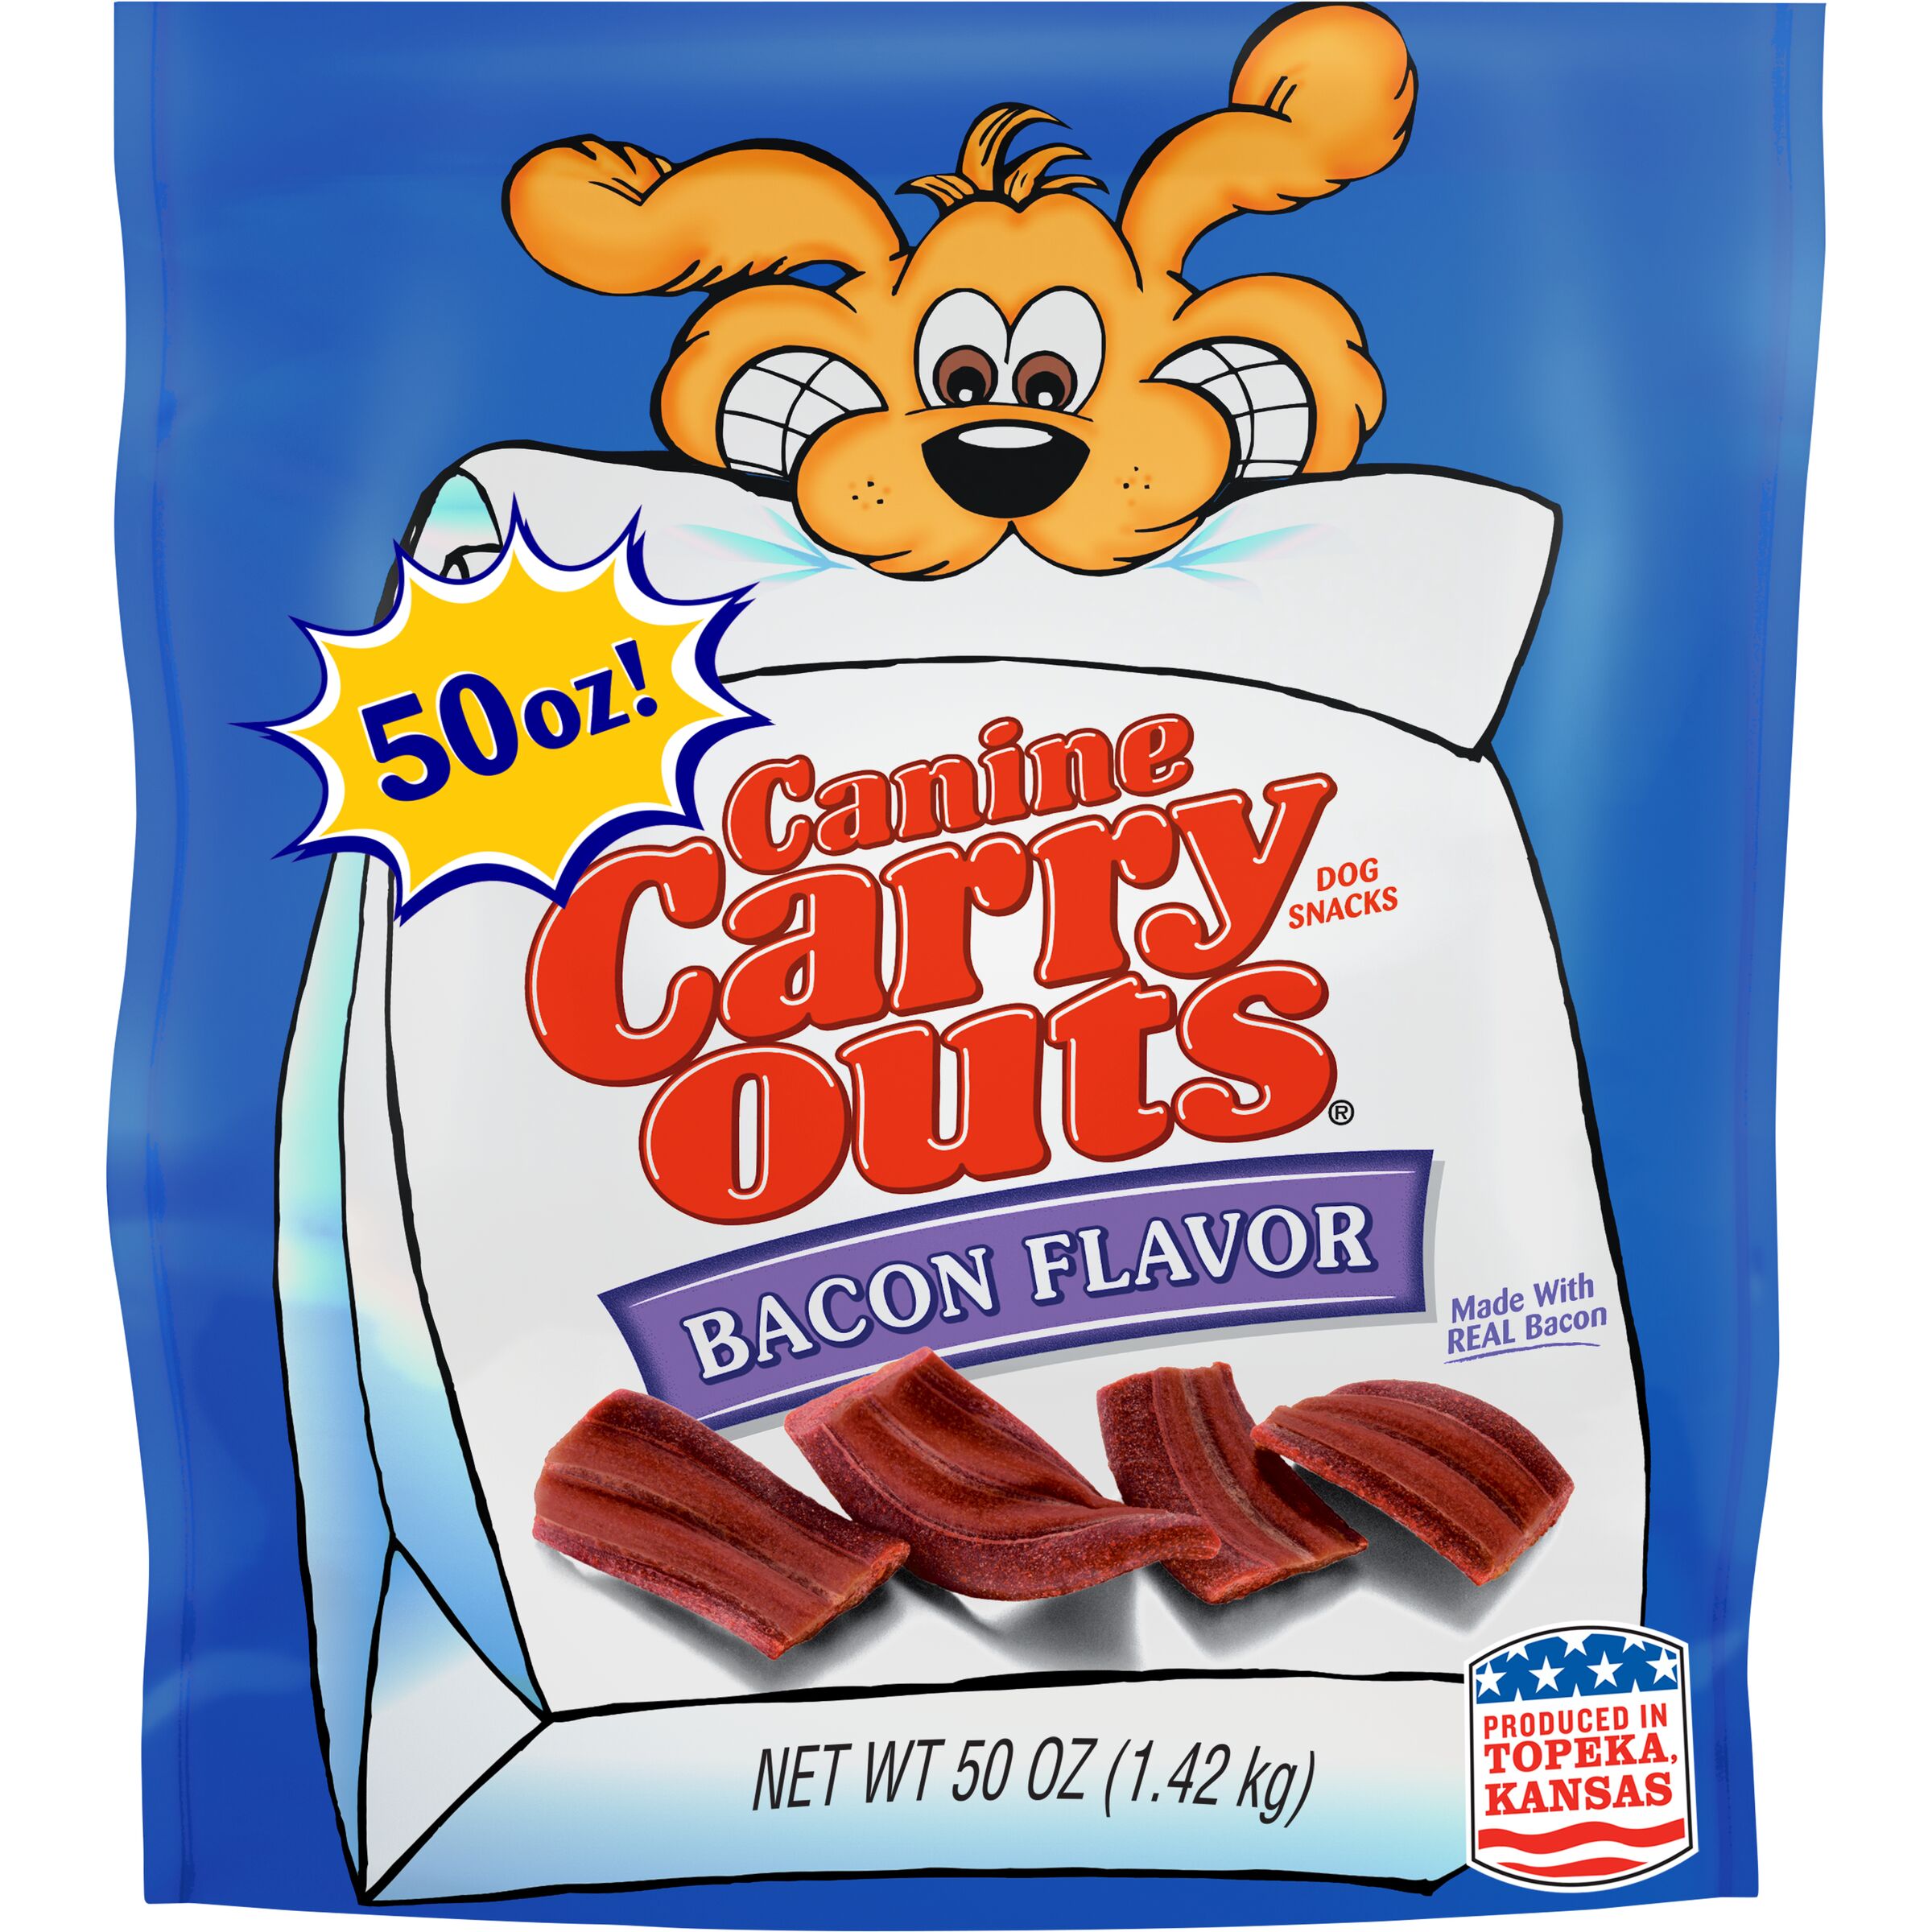 Canine Carry Outs Bacon Flavor Dog Snacks, 50-Ounce - image 1 of 3